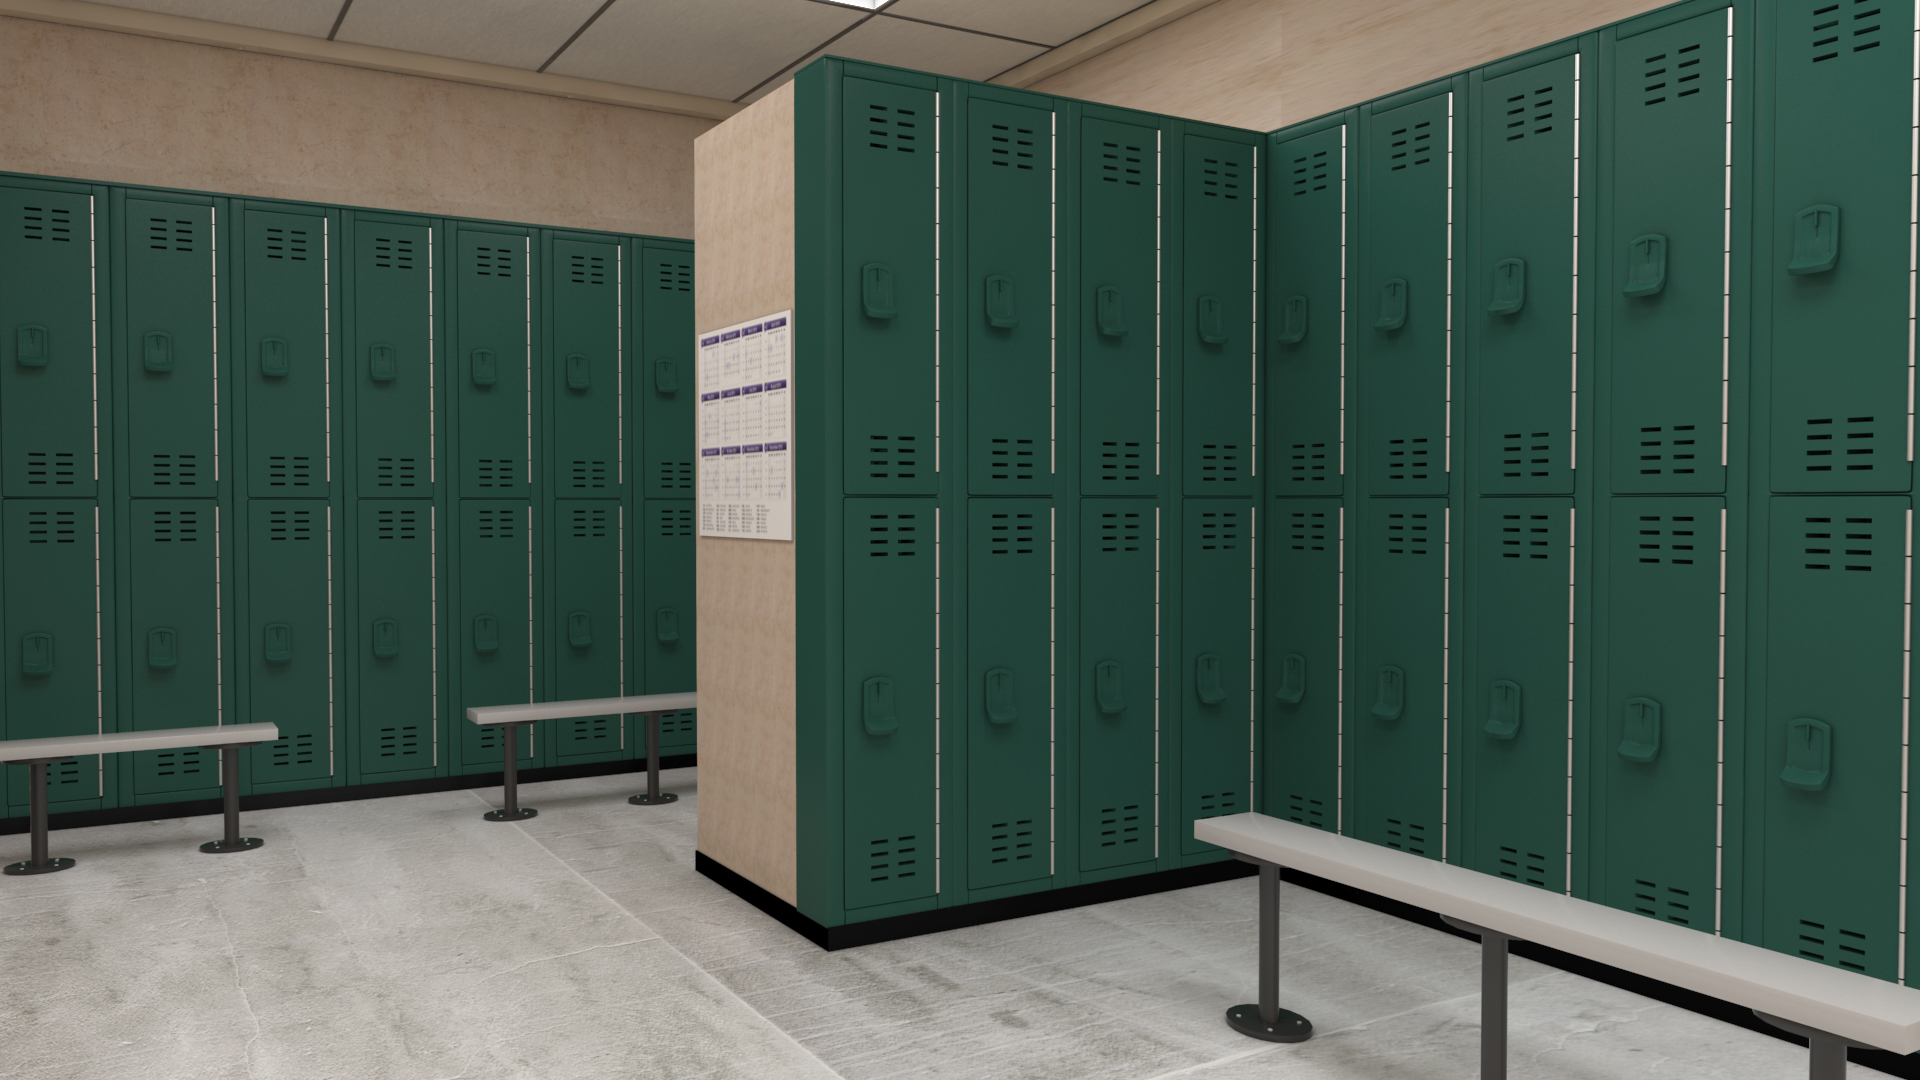 Locker Dimensions Choosing The Right Sized Locker For Your Space